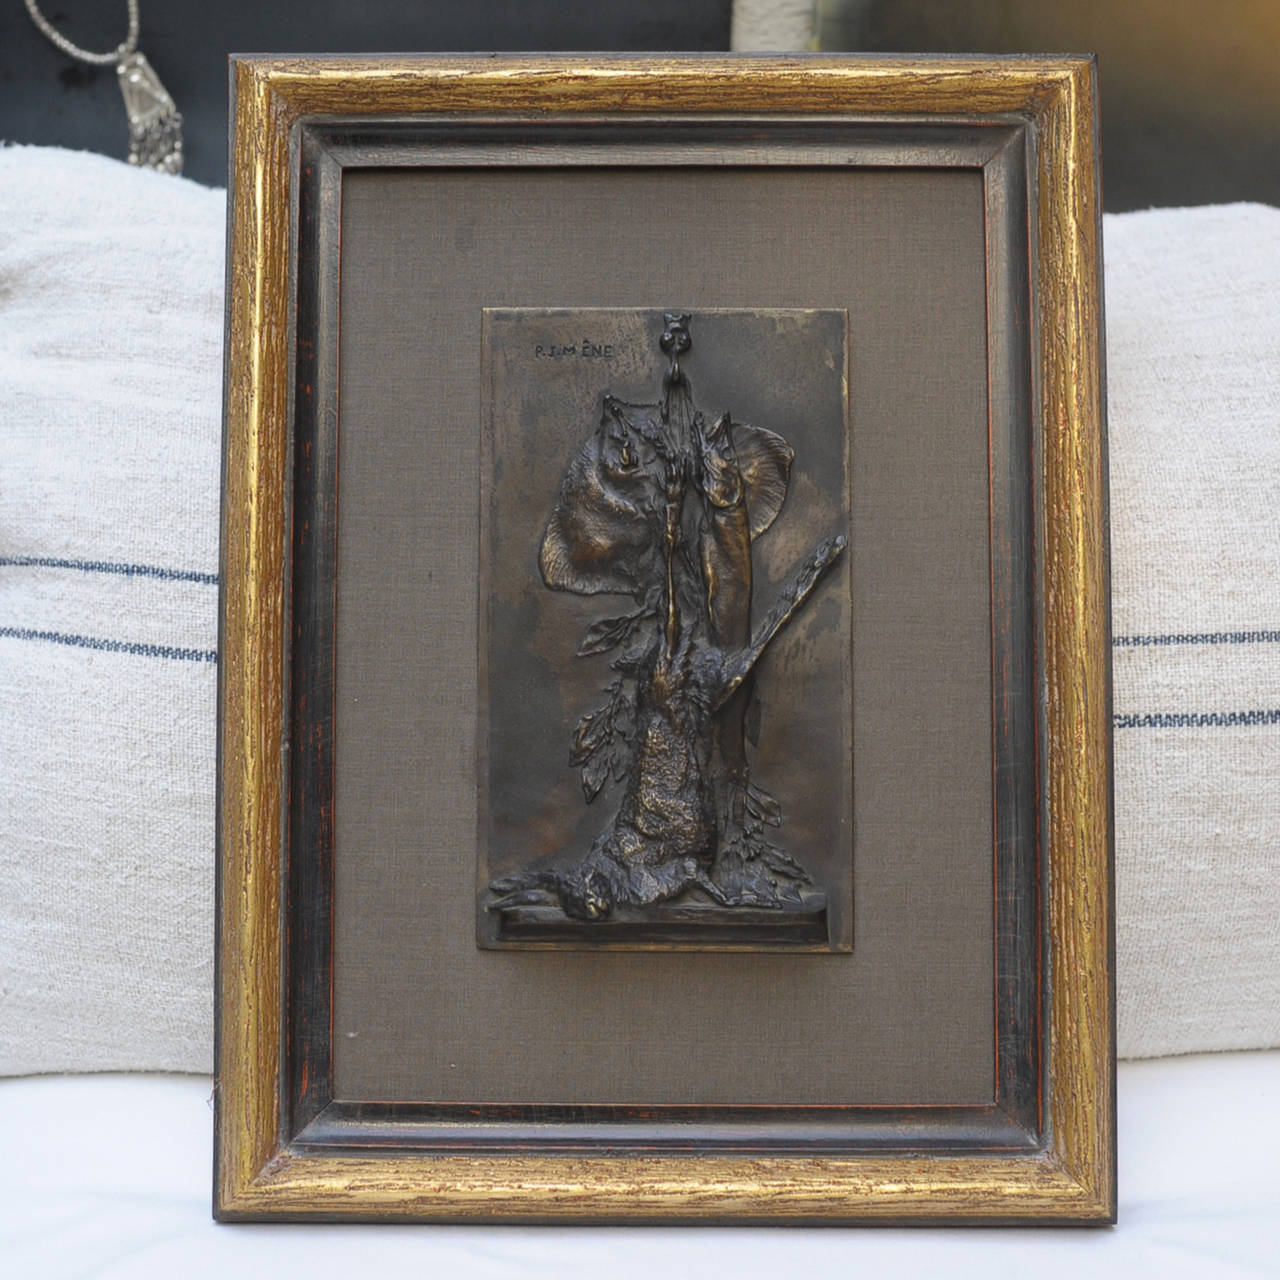 Patinated bronze plaque by famed artist P.J. Mêne depicting a hare and game fish. Translated French title is 